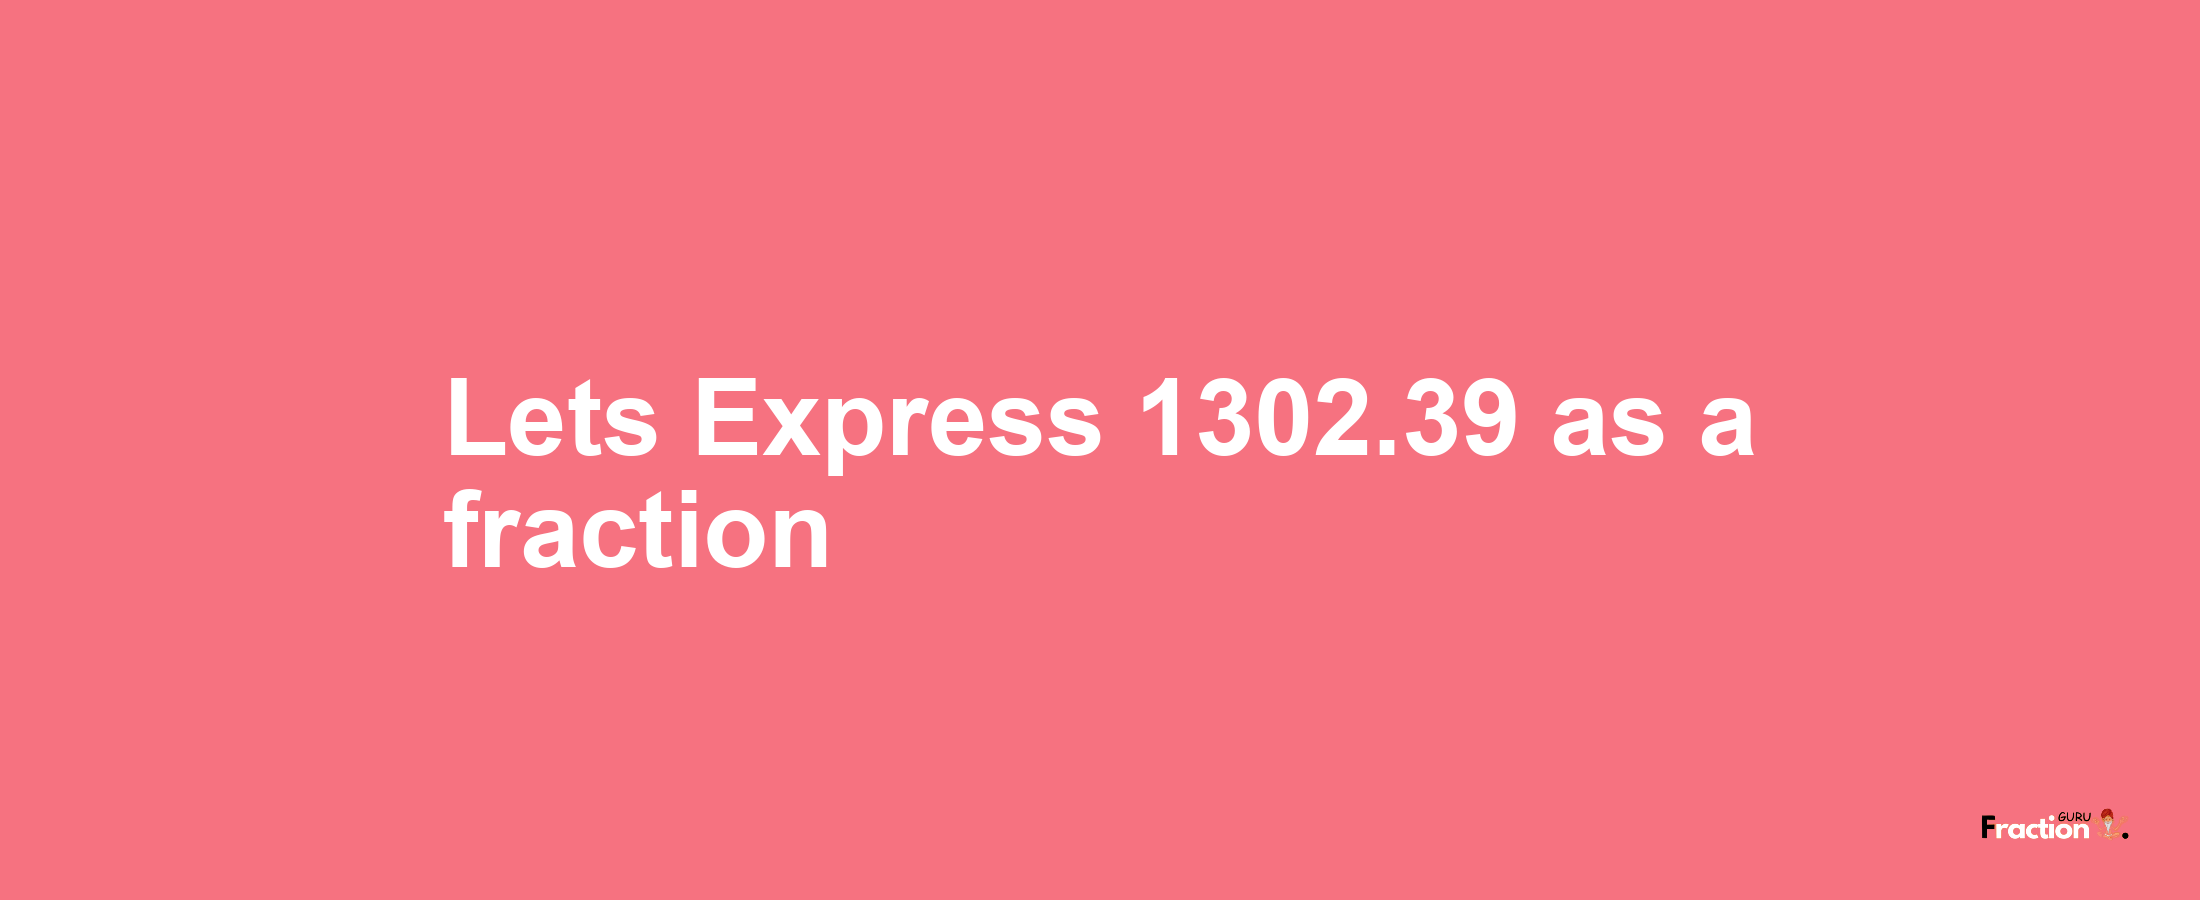 Lets Express 1302.39 as afraction